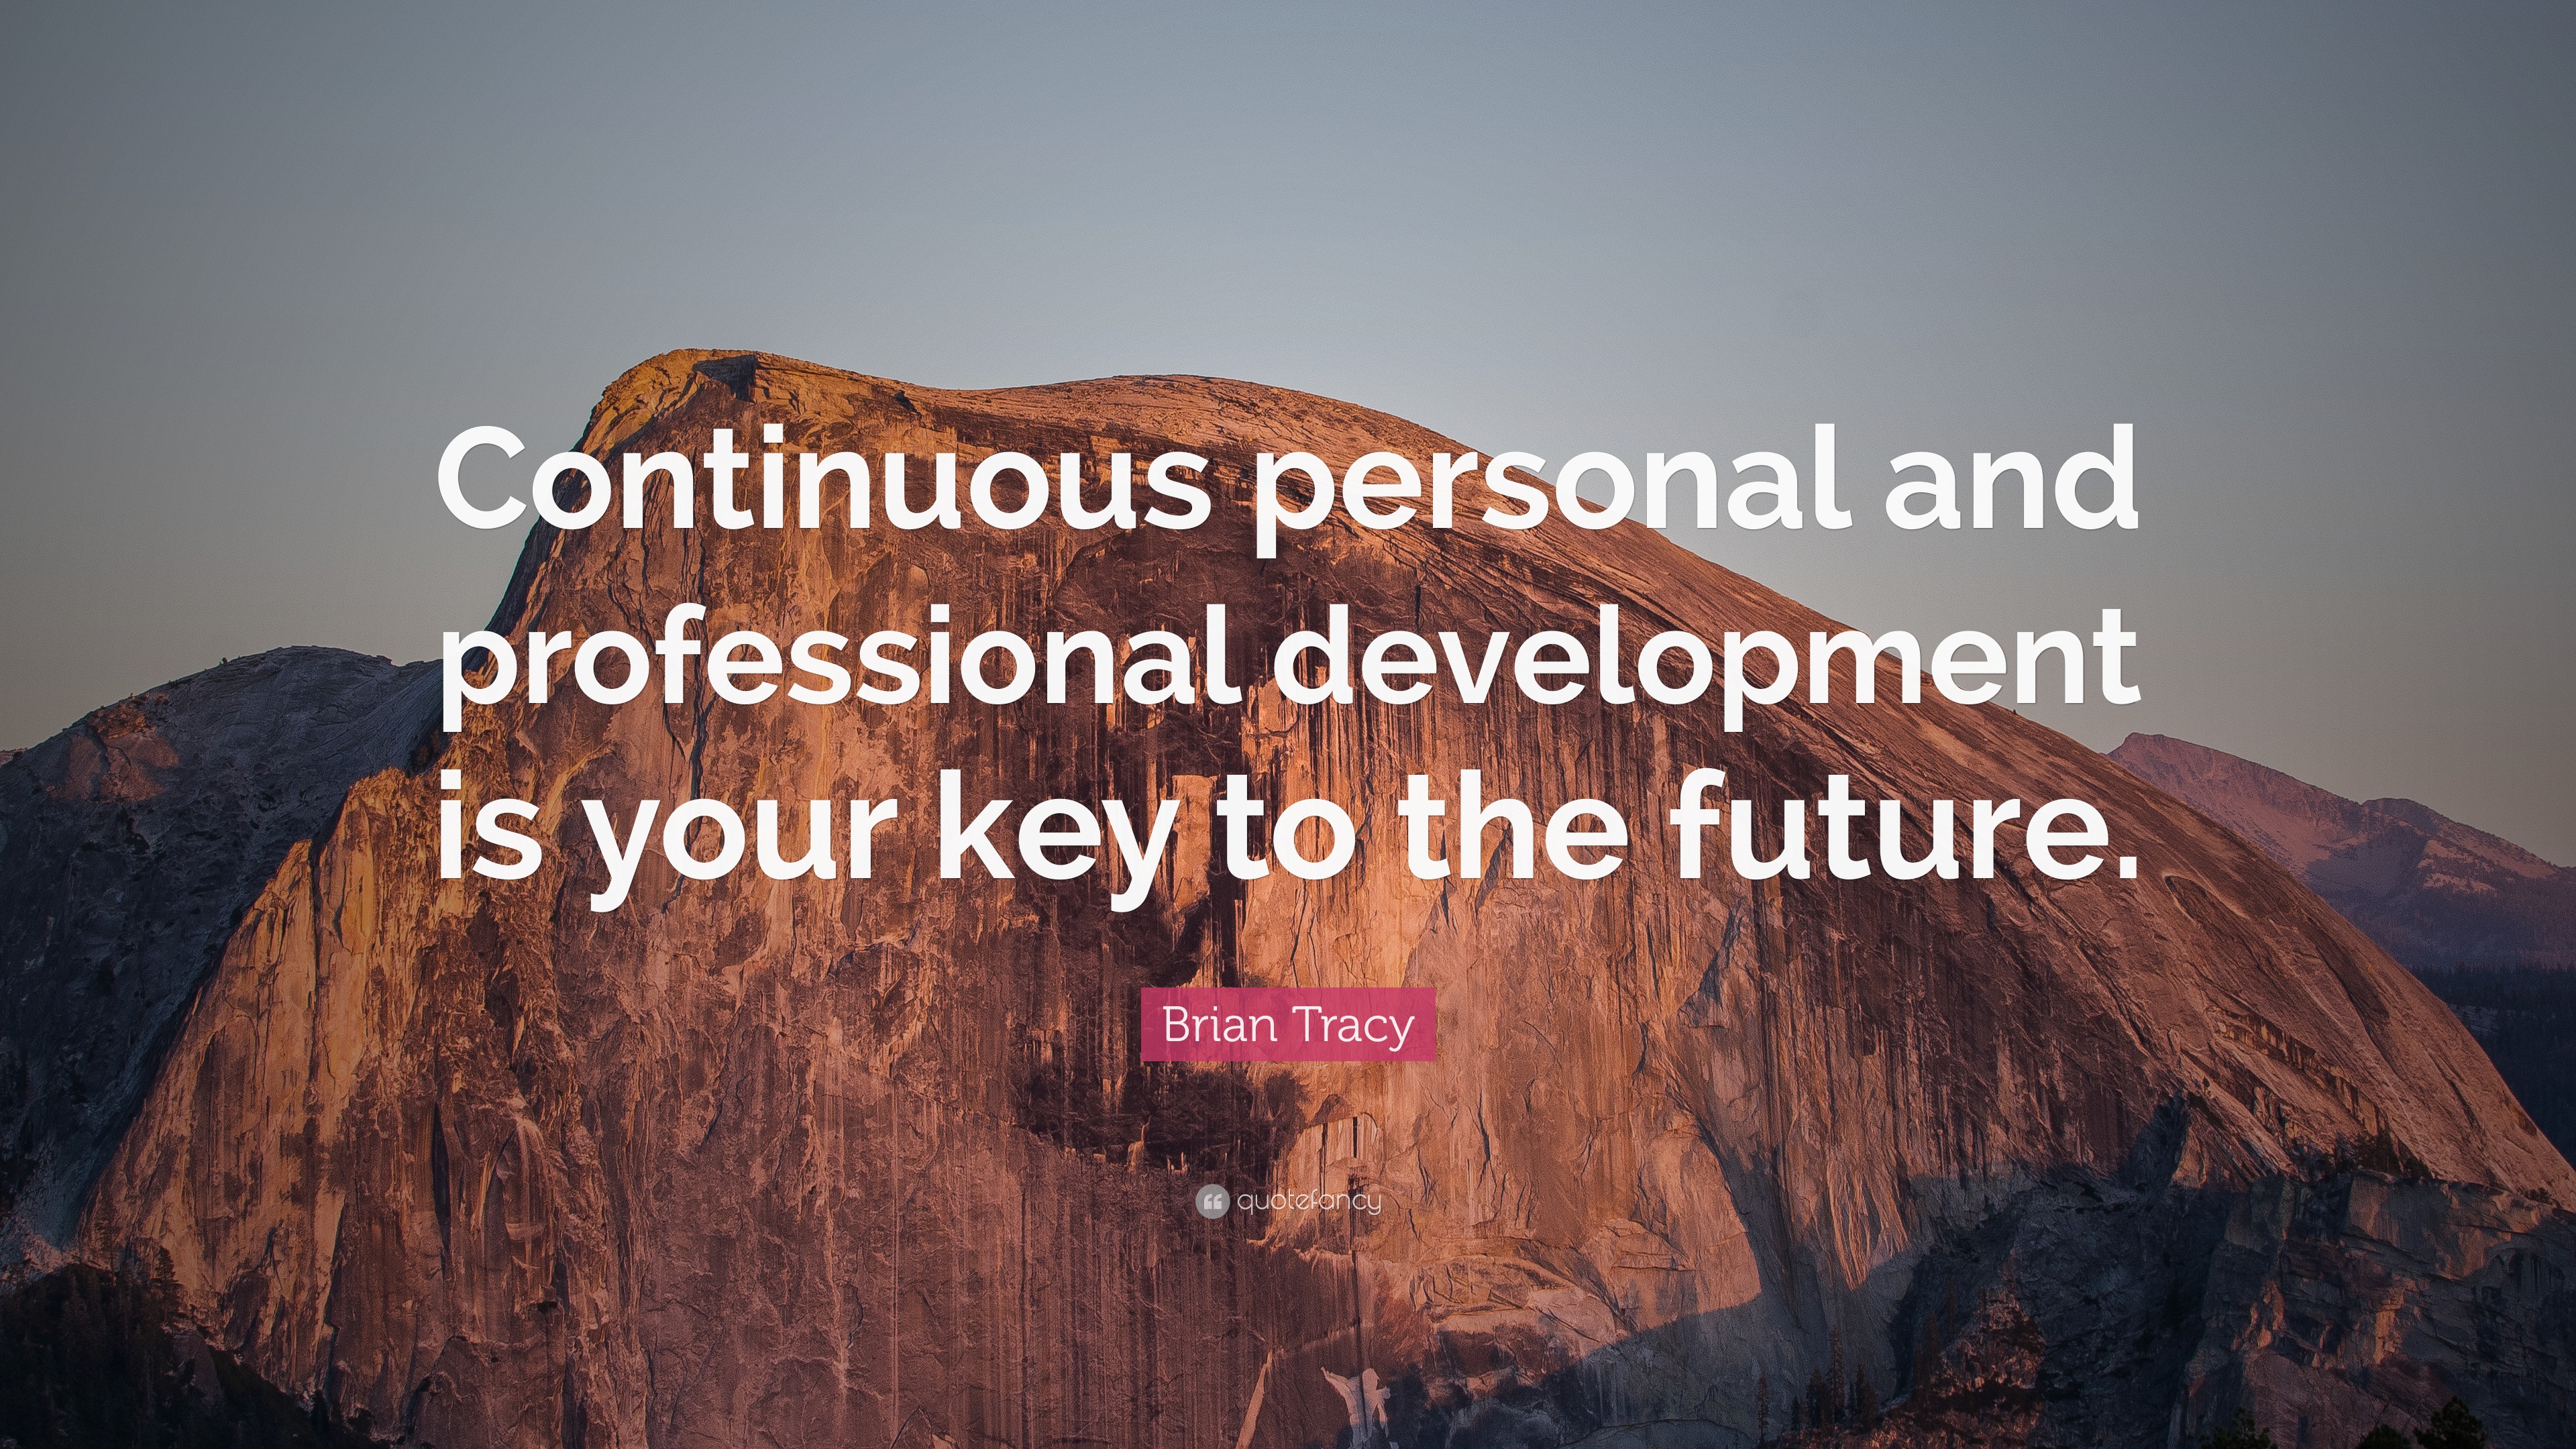 Brian Tracy Quote: “Continuous personal and professional development is